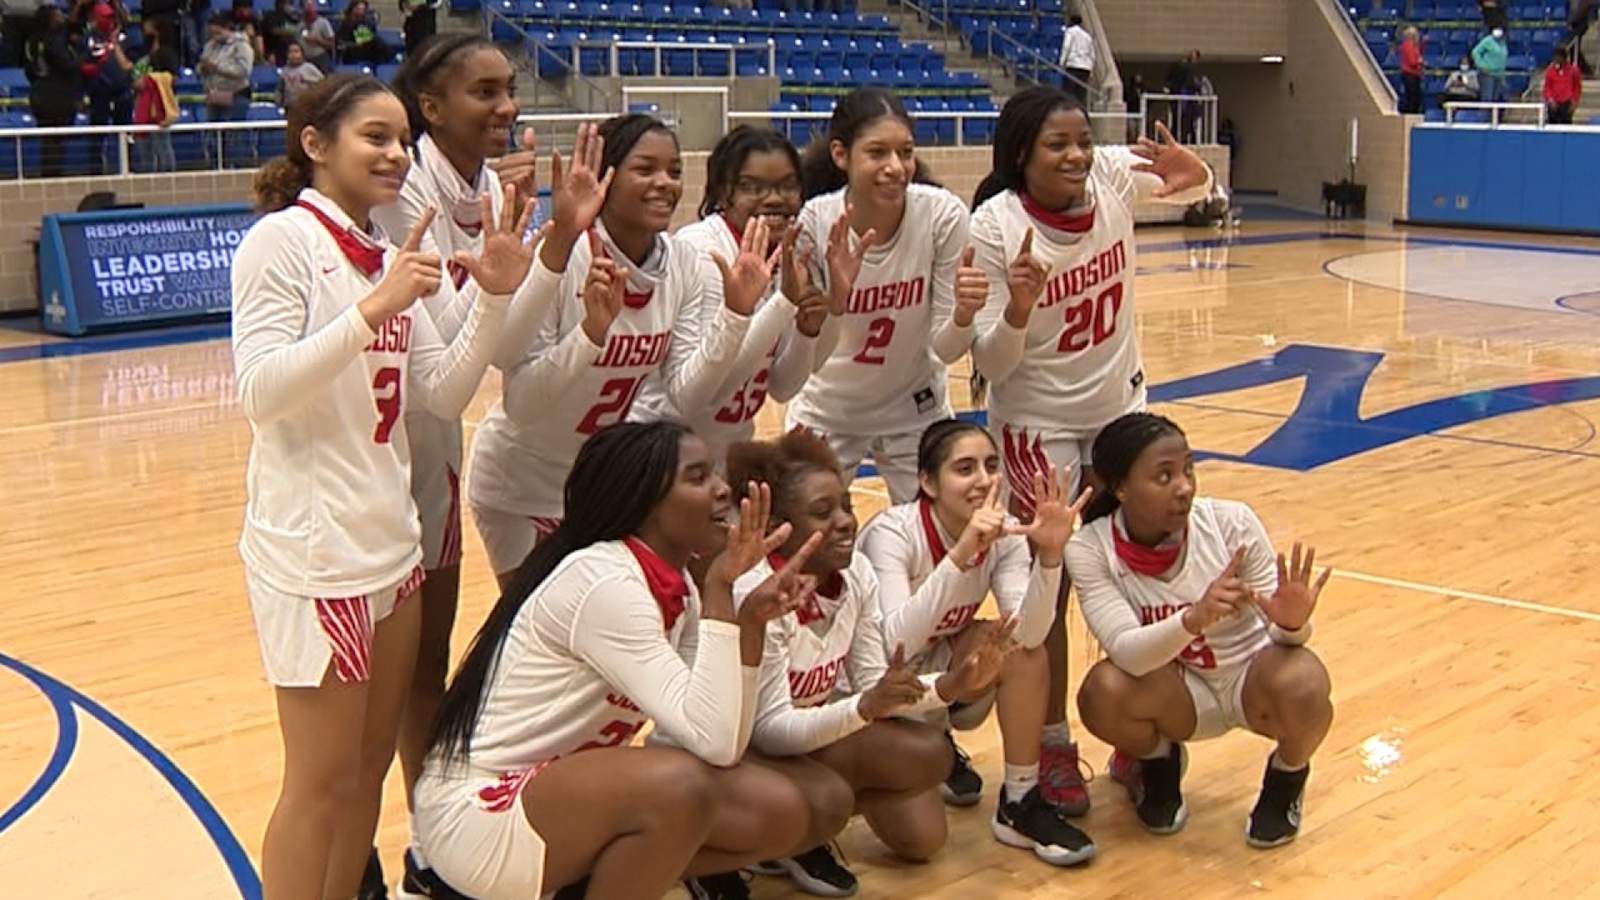 HIGHLIGHTS: Judson girls knock off Reagan in overtime, win fifth straight regional title